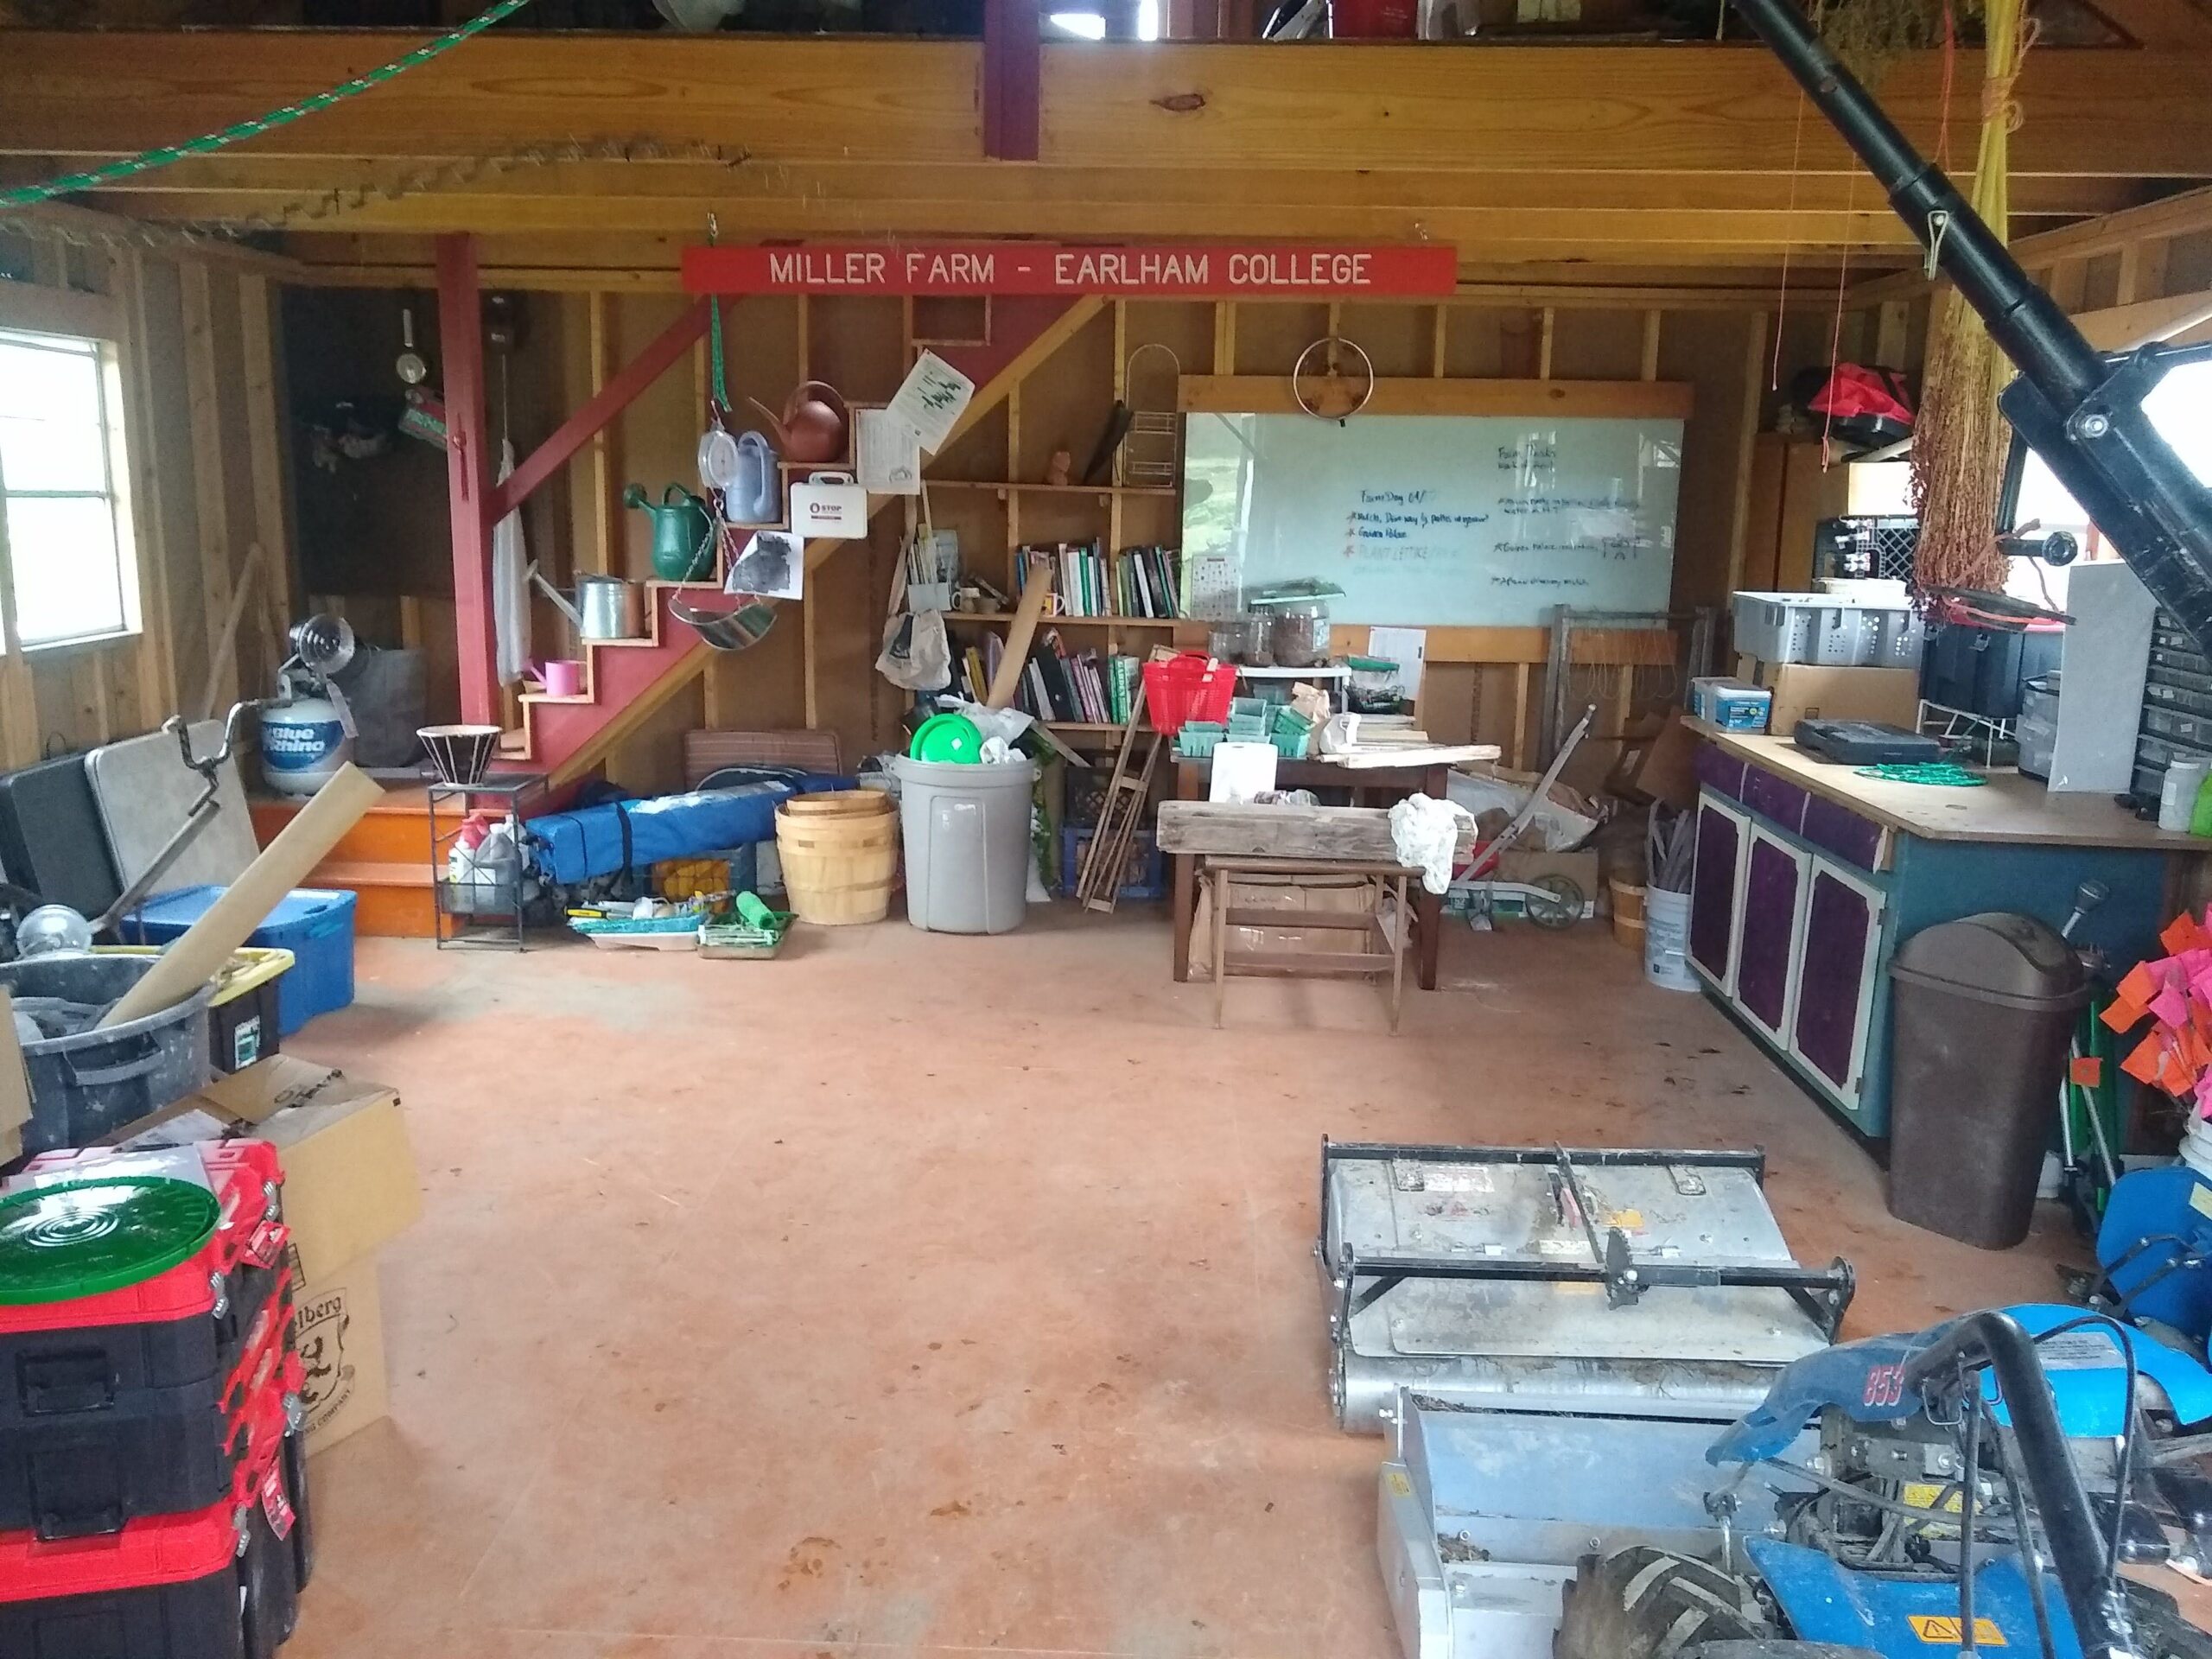 The interior of the shed at Miller Farm